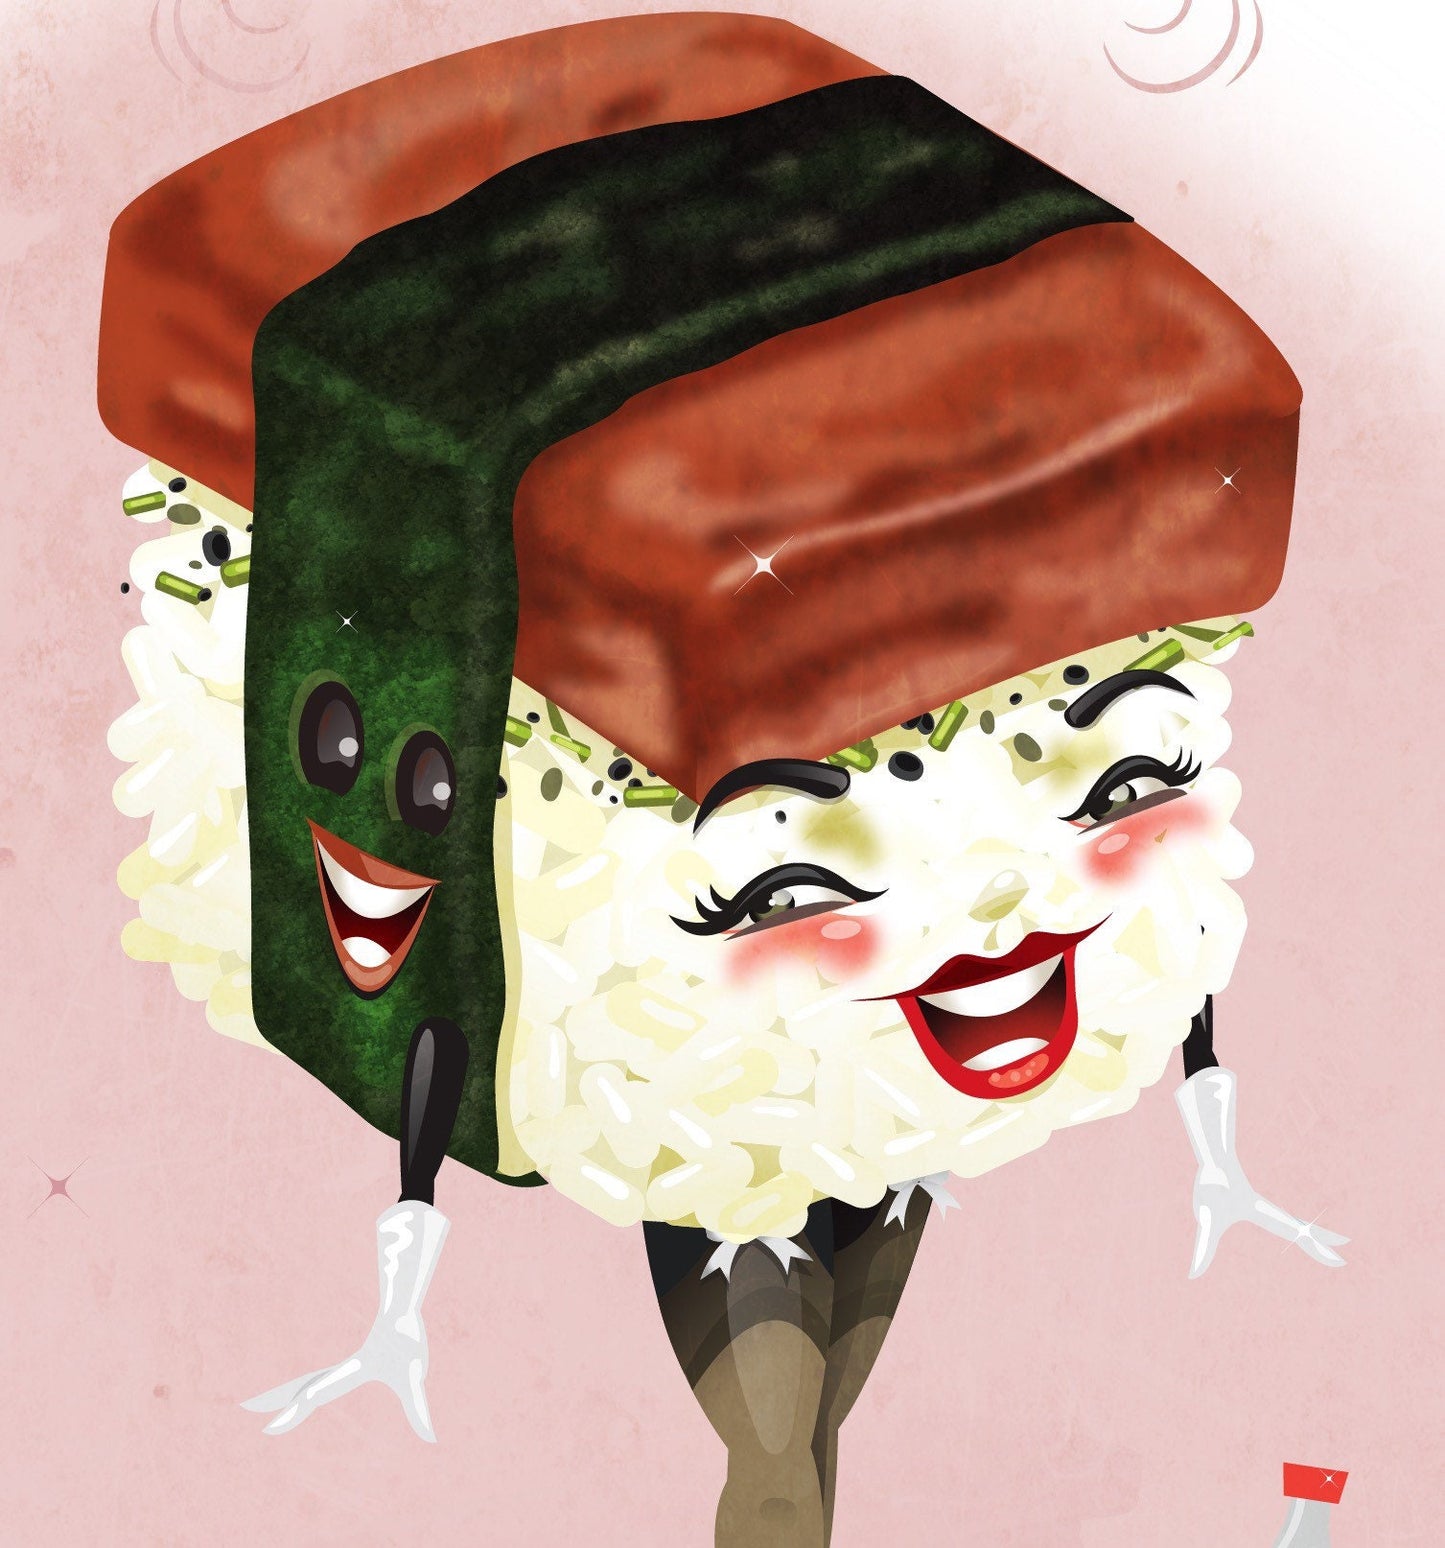 Thanks for Holding me Together Digital Print, Sushi Illustration, Quirky Foodie Art